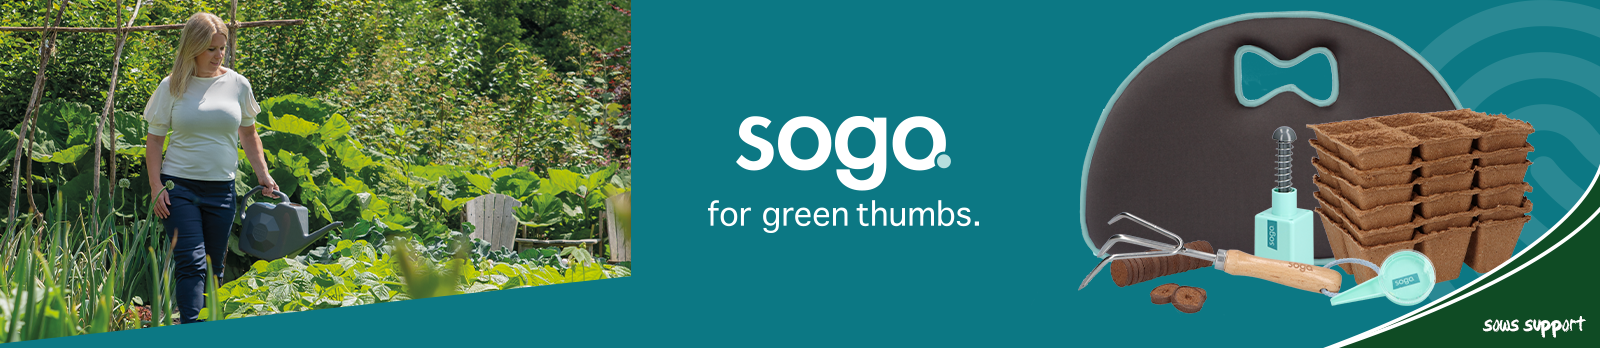 SOGO. FOR GREEN THUMBS